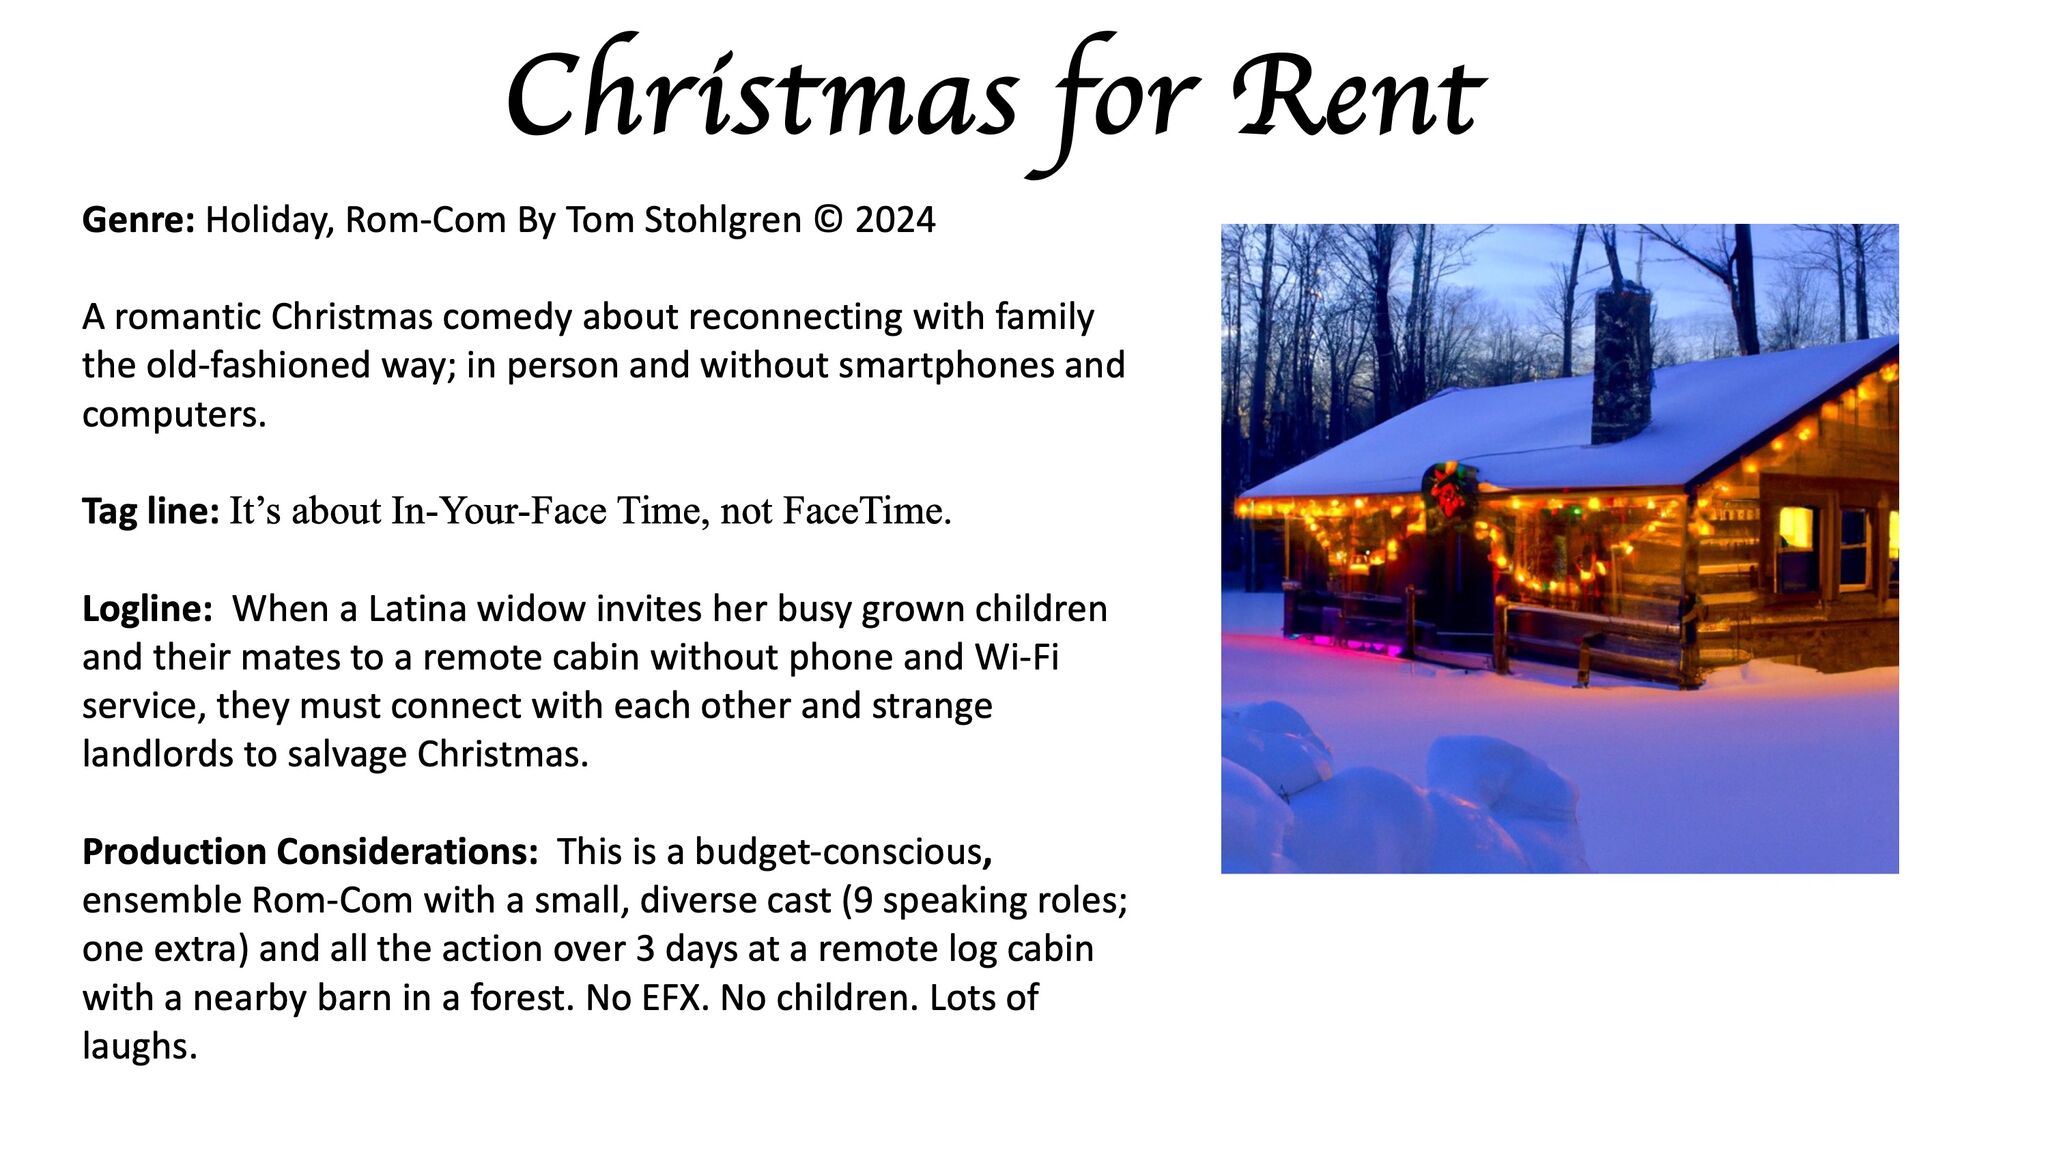 CHRISTMAS FOR RENT